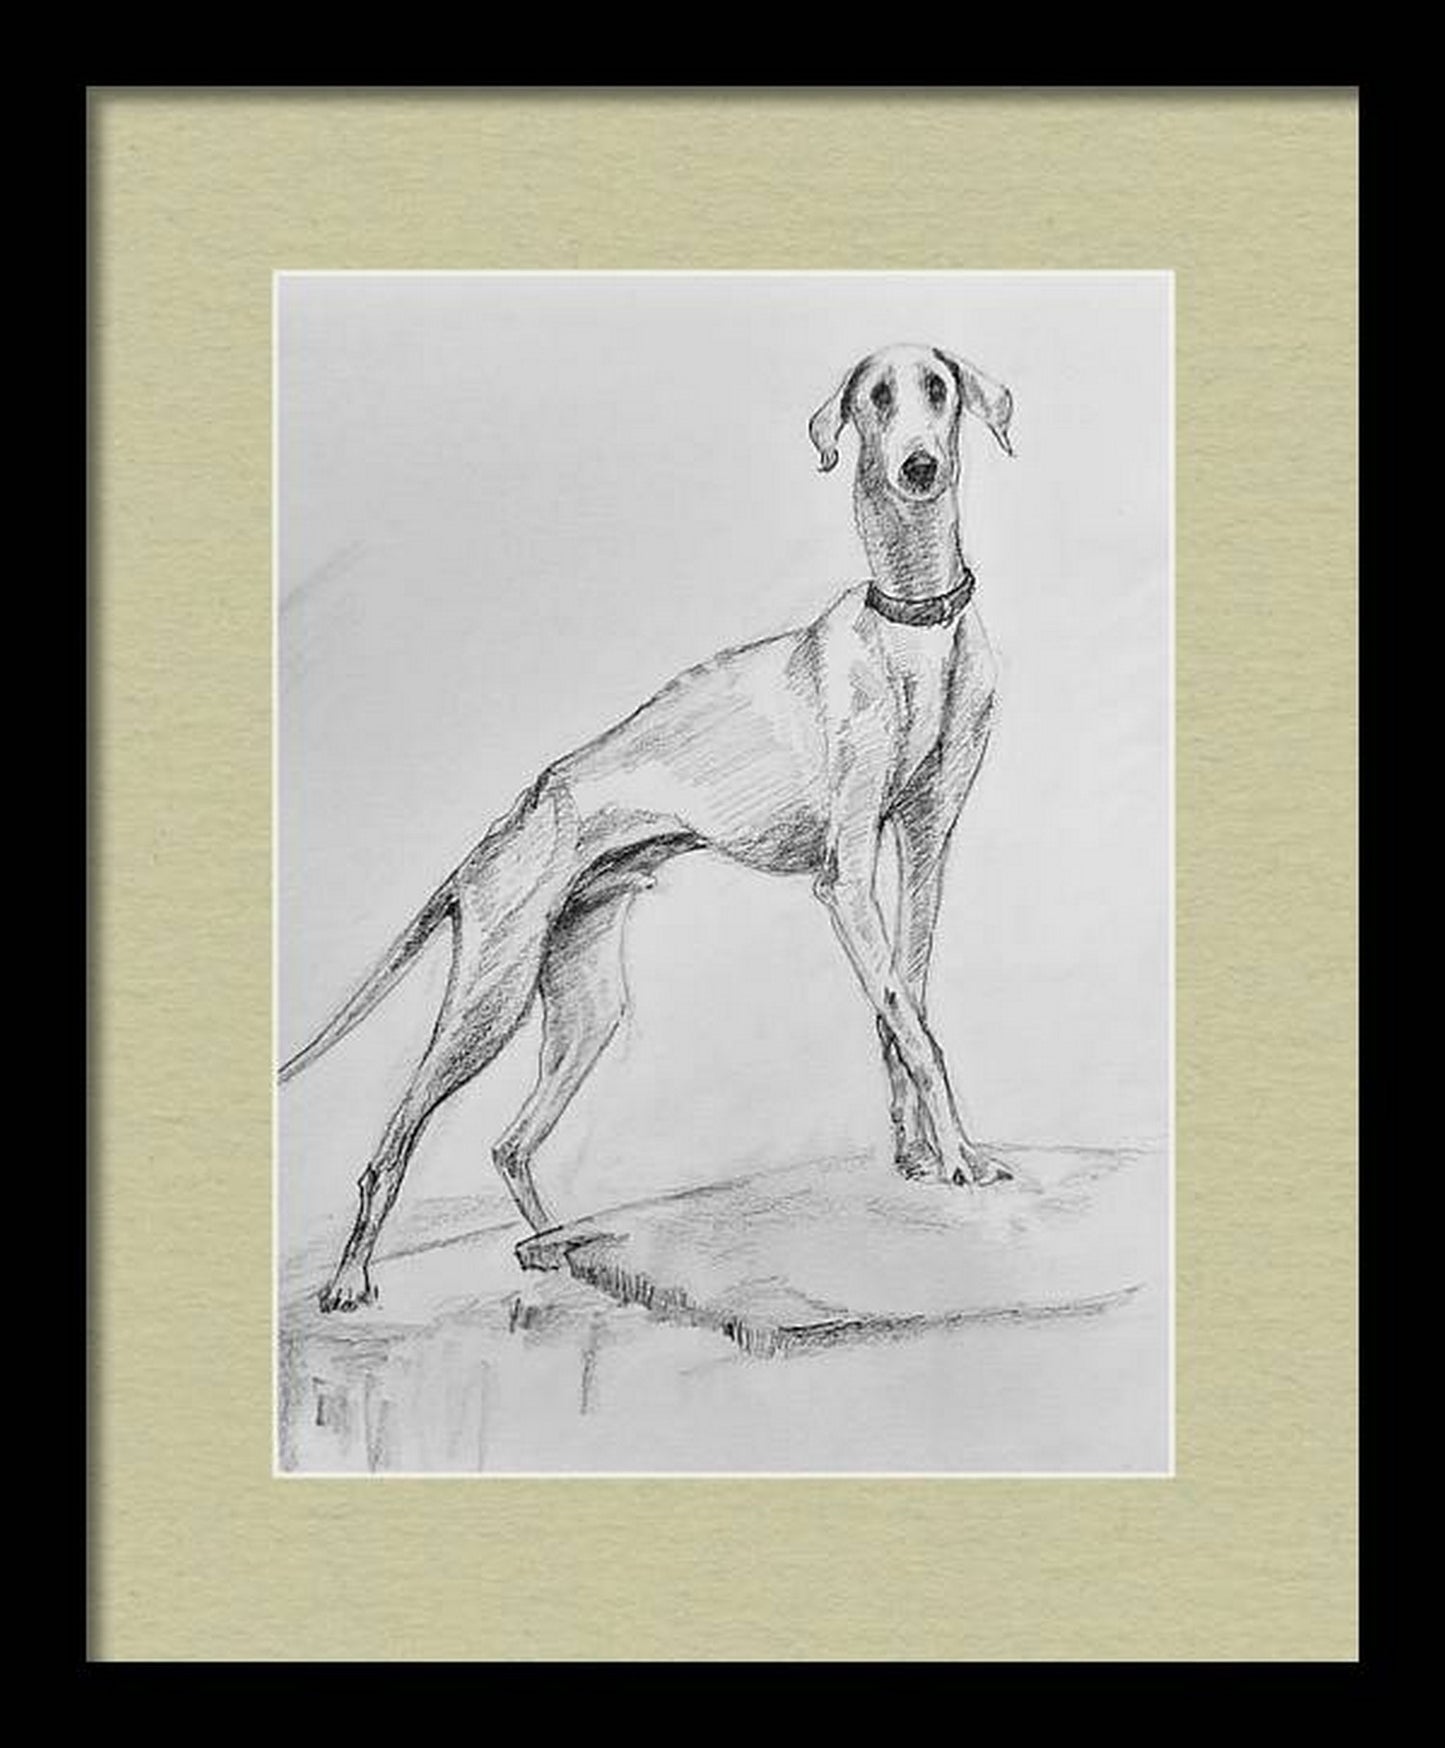 In a virtual frame, The Famous Indian Mudhol breed dog, pencil sketch on paper